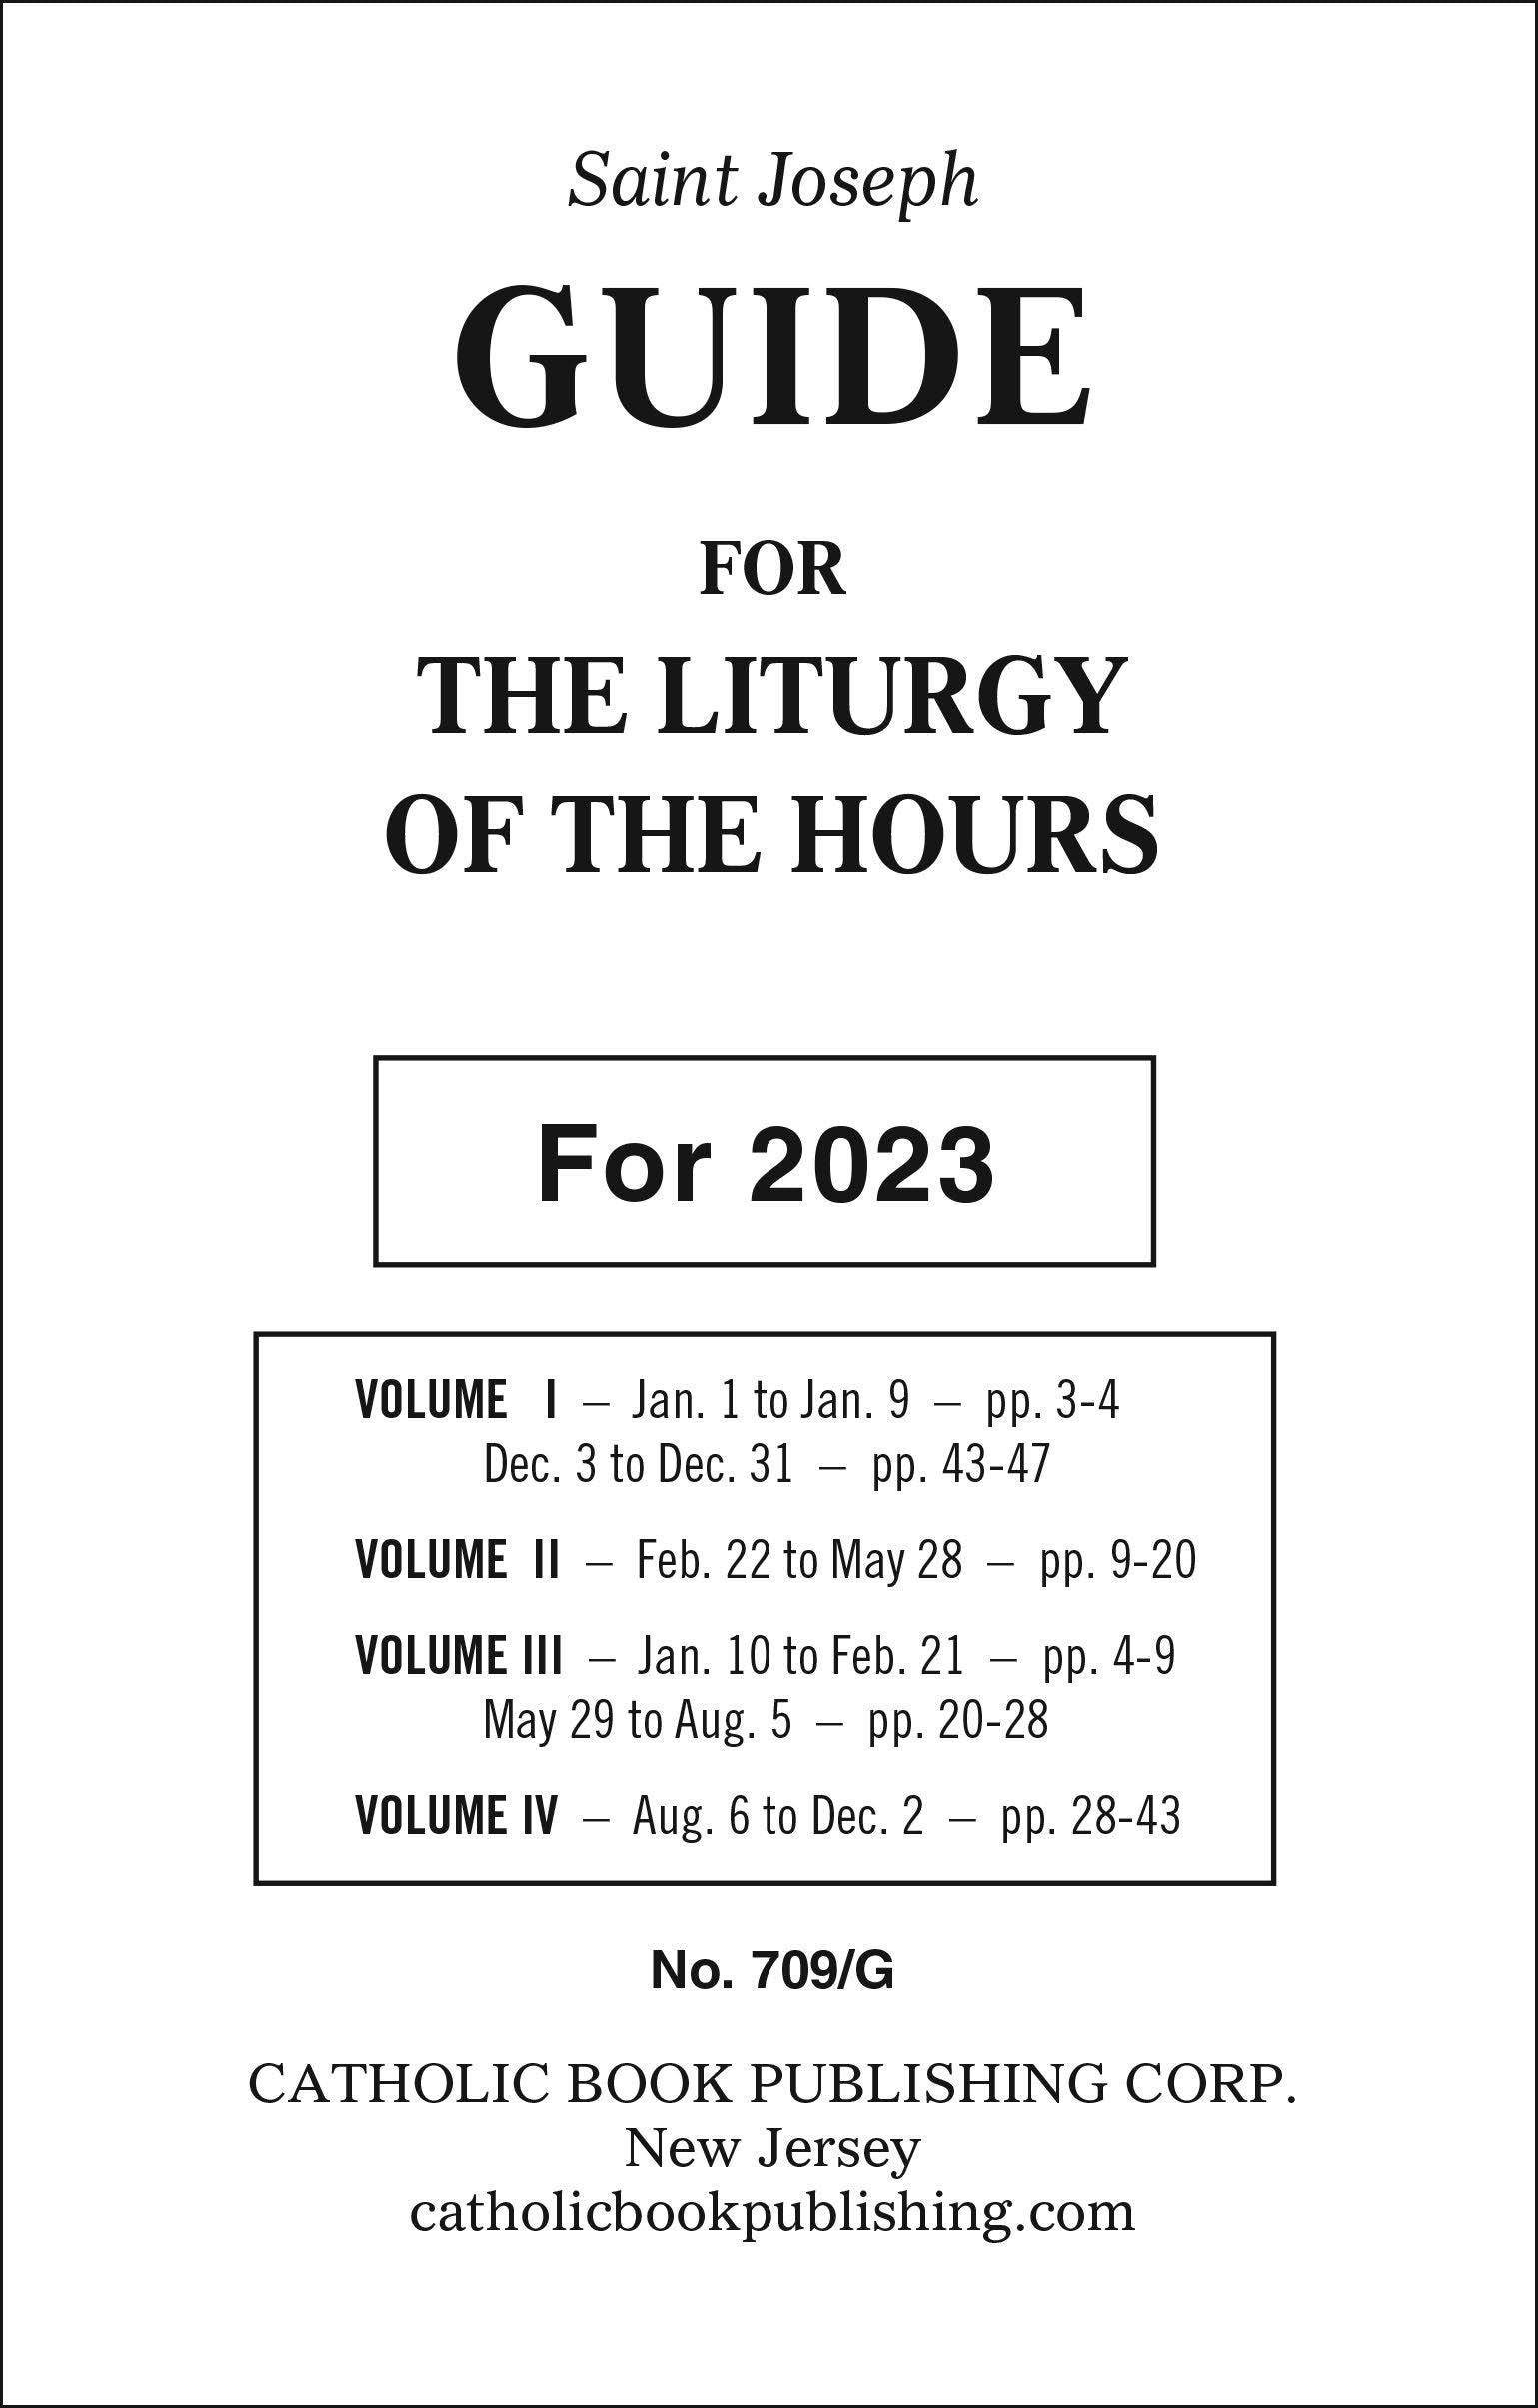 Liturgy of the Hours Guide for 2022 (Large Type) by Catholic Book Publishing Corp (producer) (9781953152398)